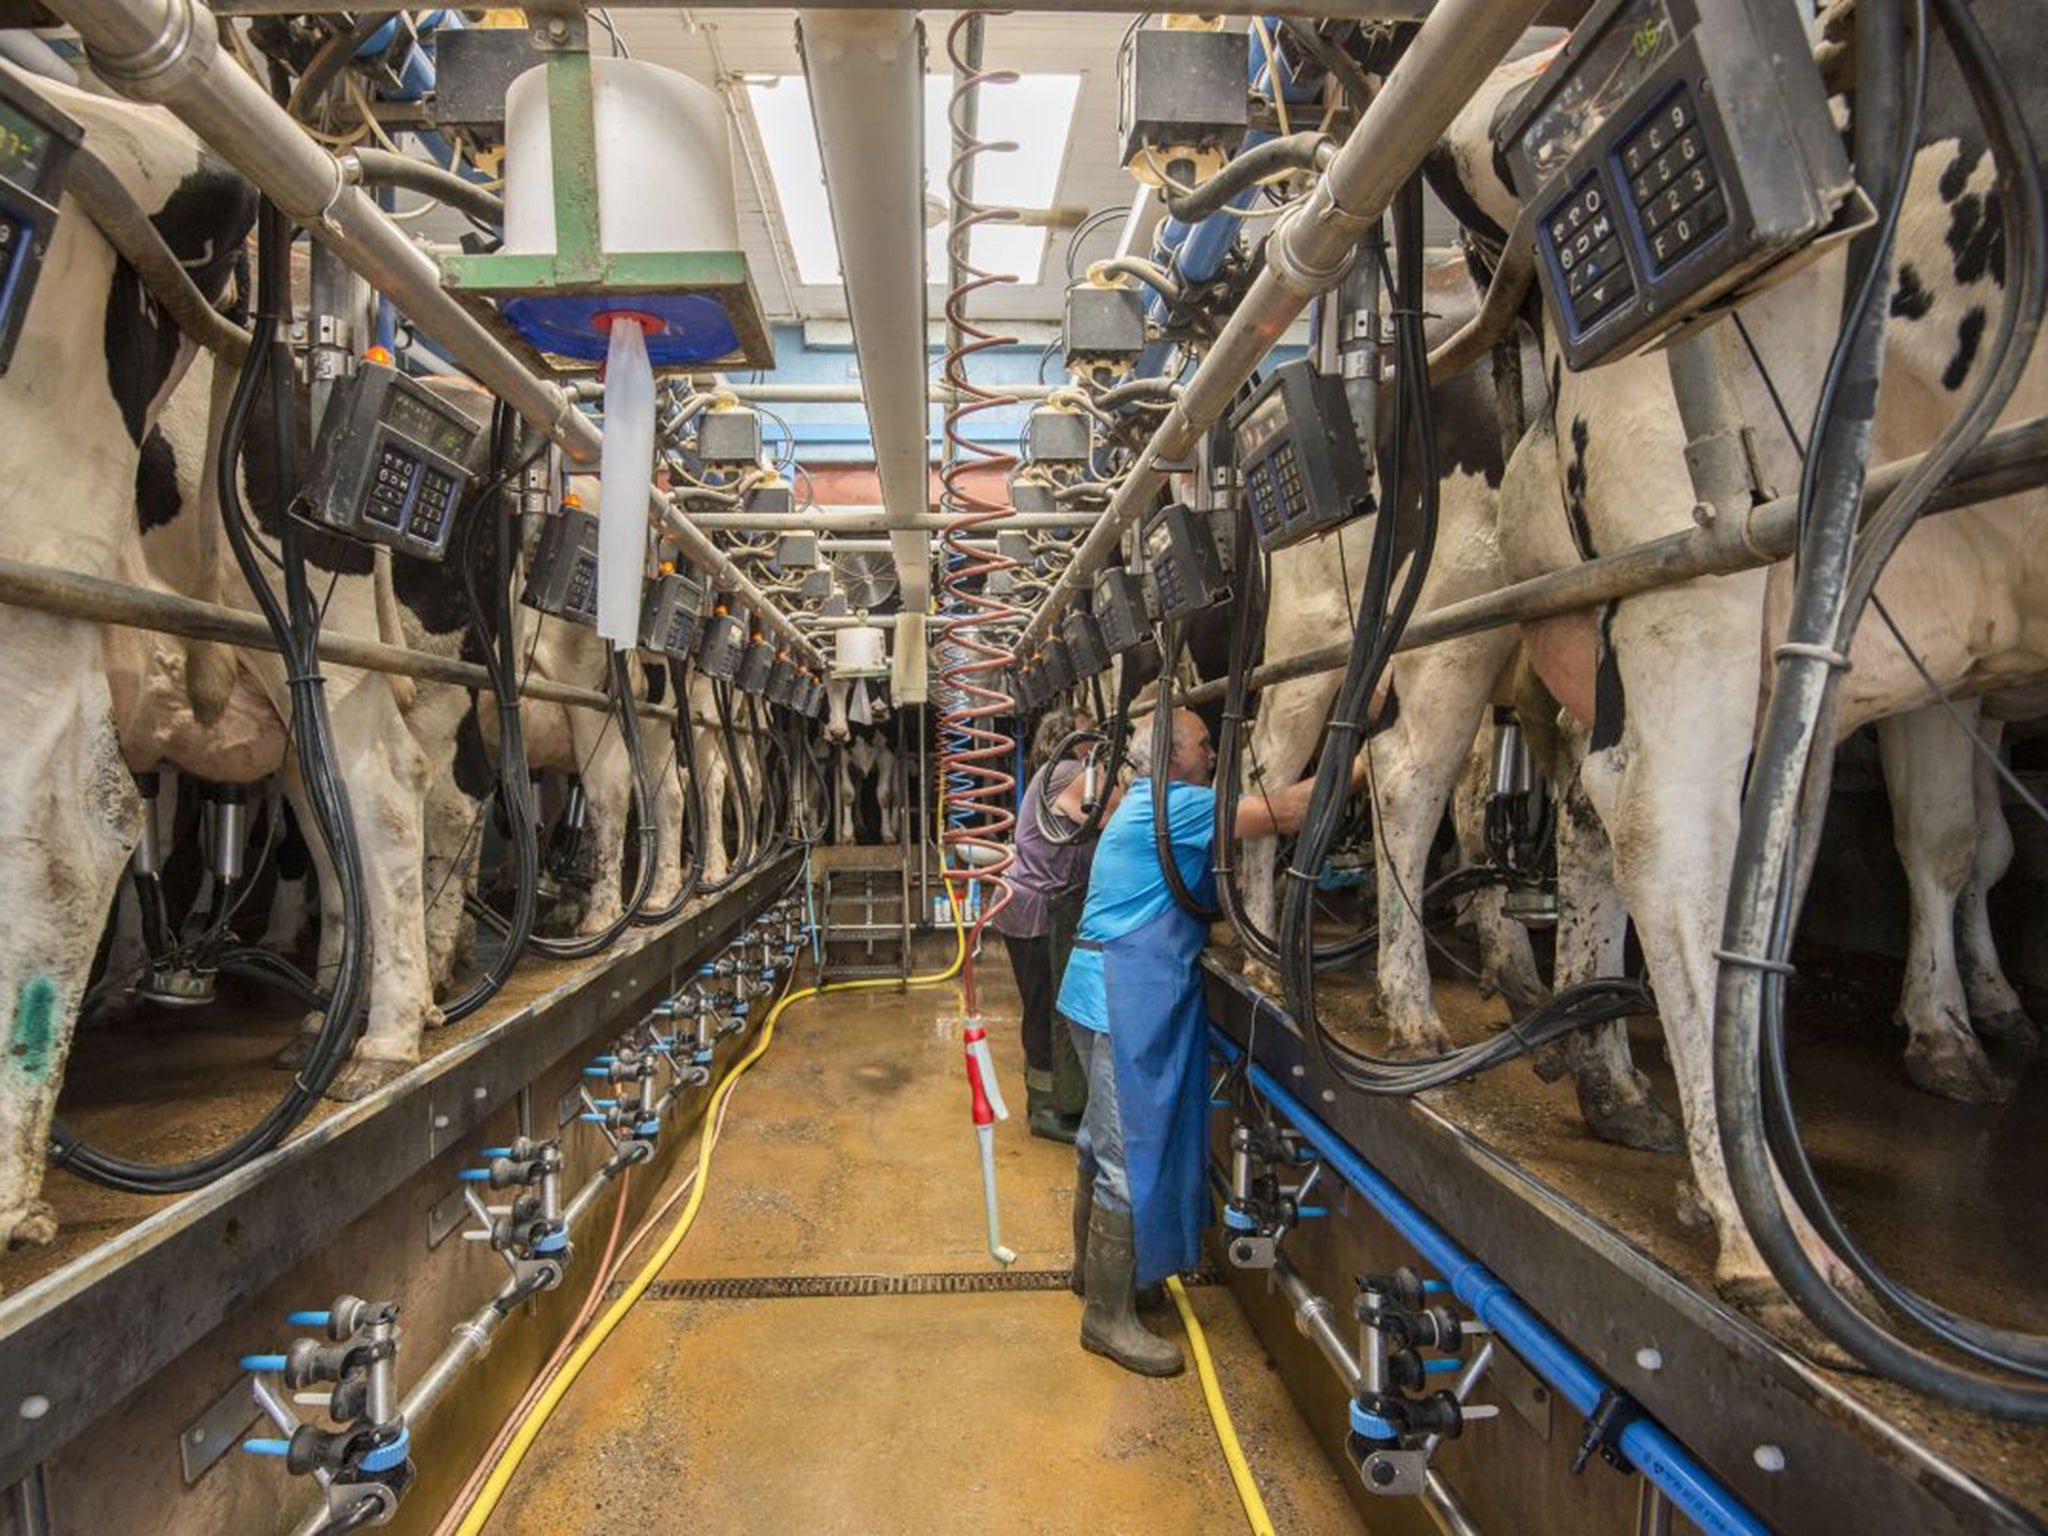 Dairy farmers face a serious threat to their future because of economic pressures